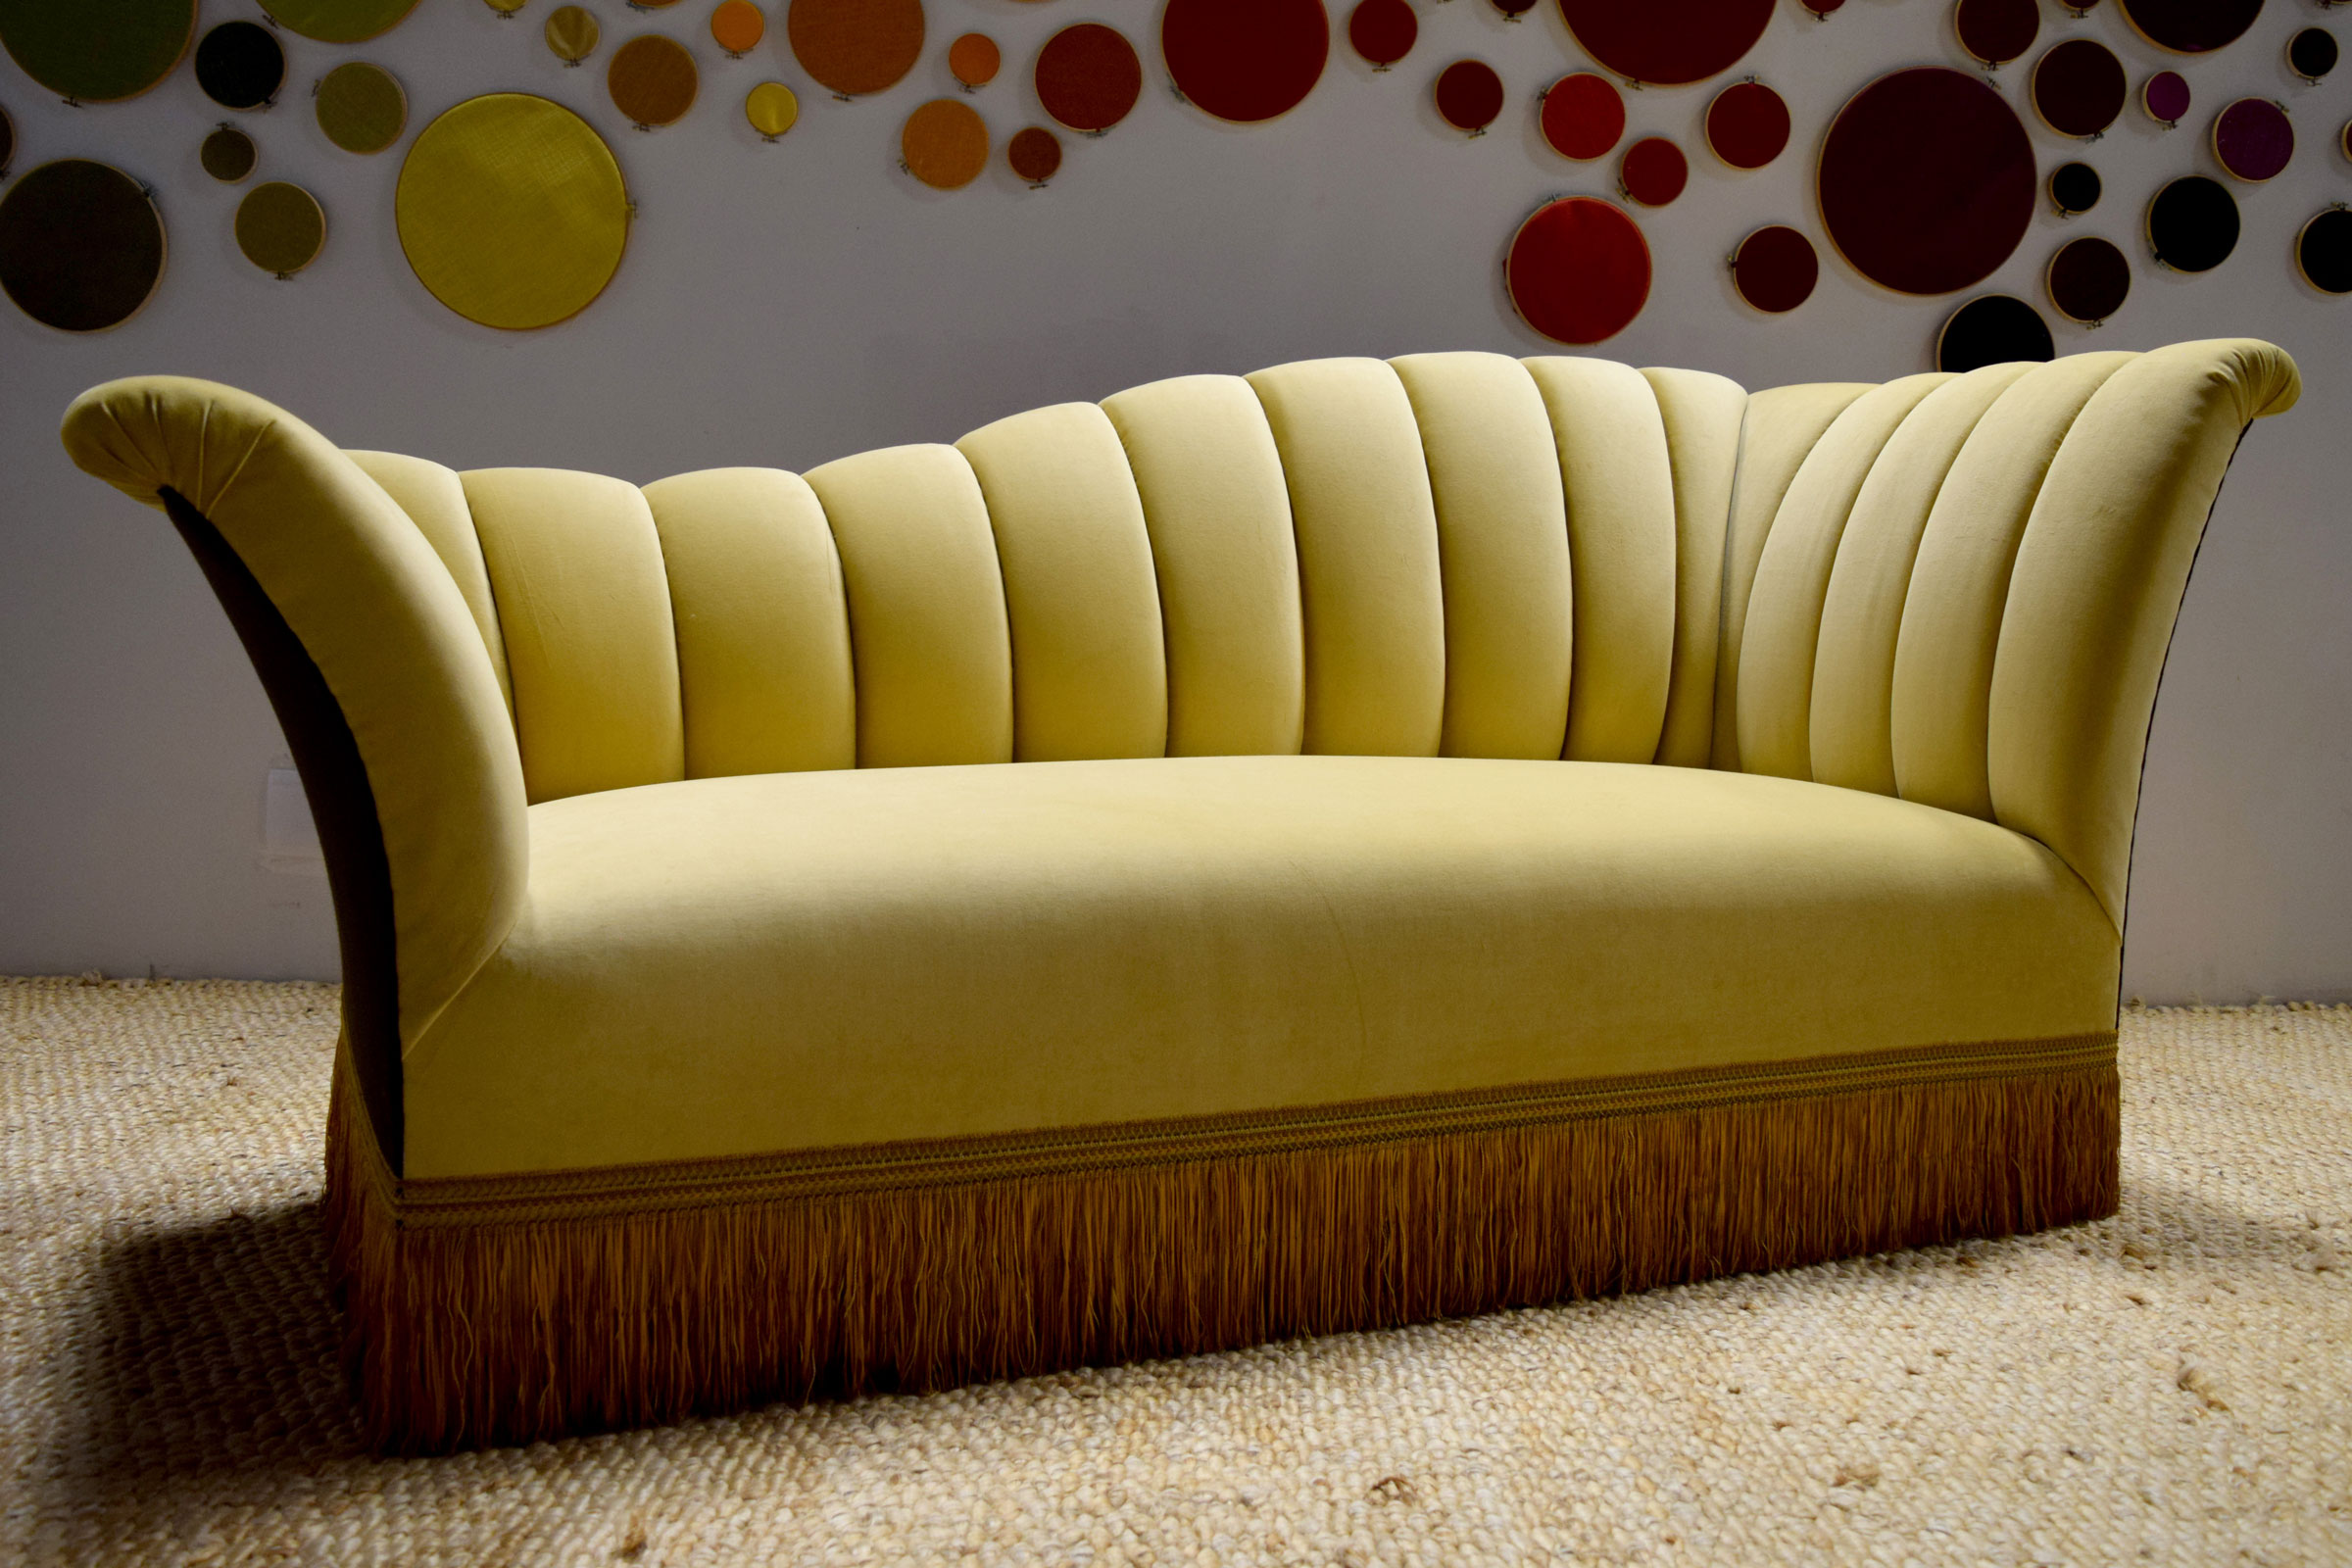 ecobalanza seattle furniture brand channel tufted fringed velvet settee